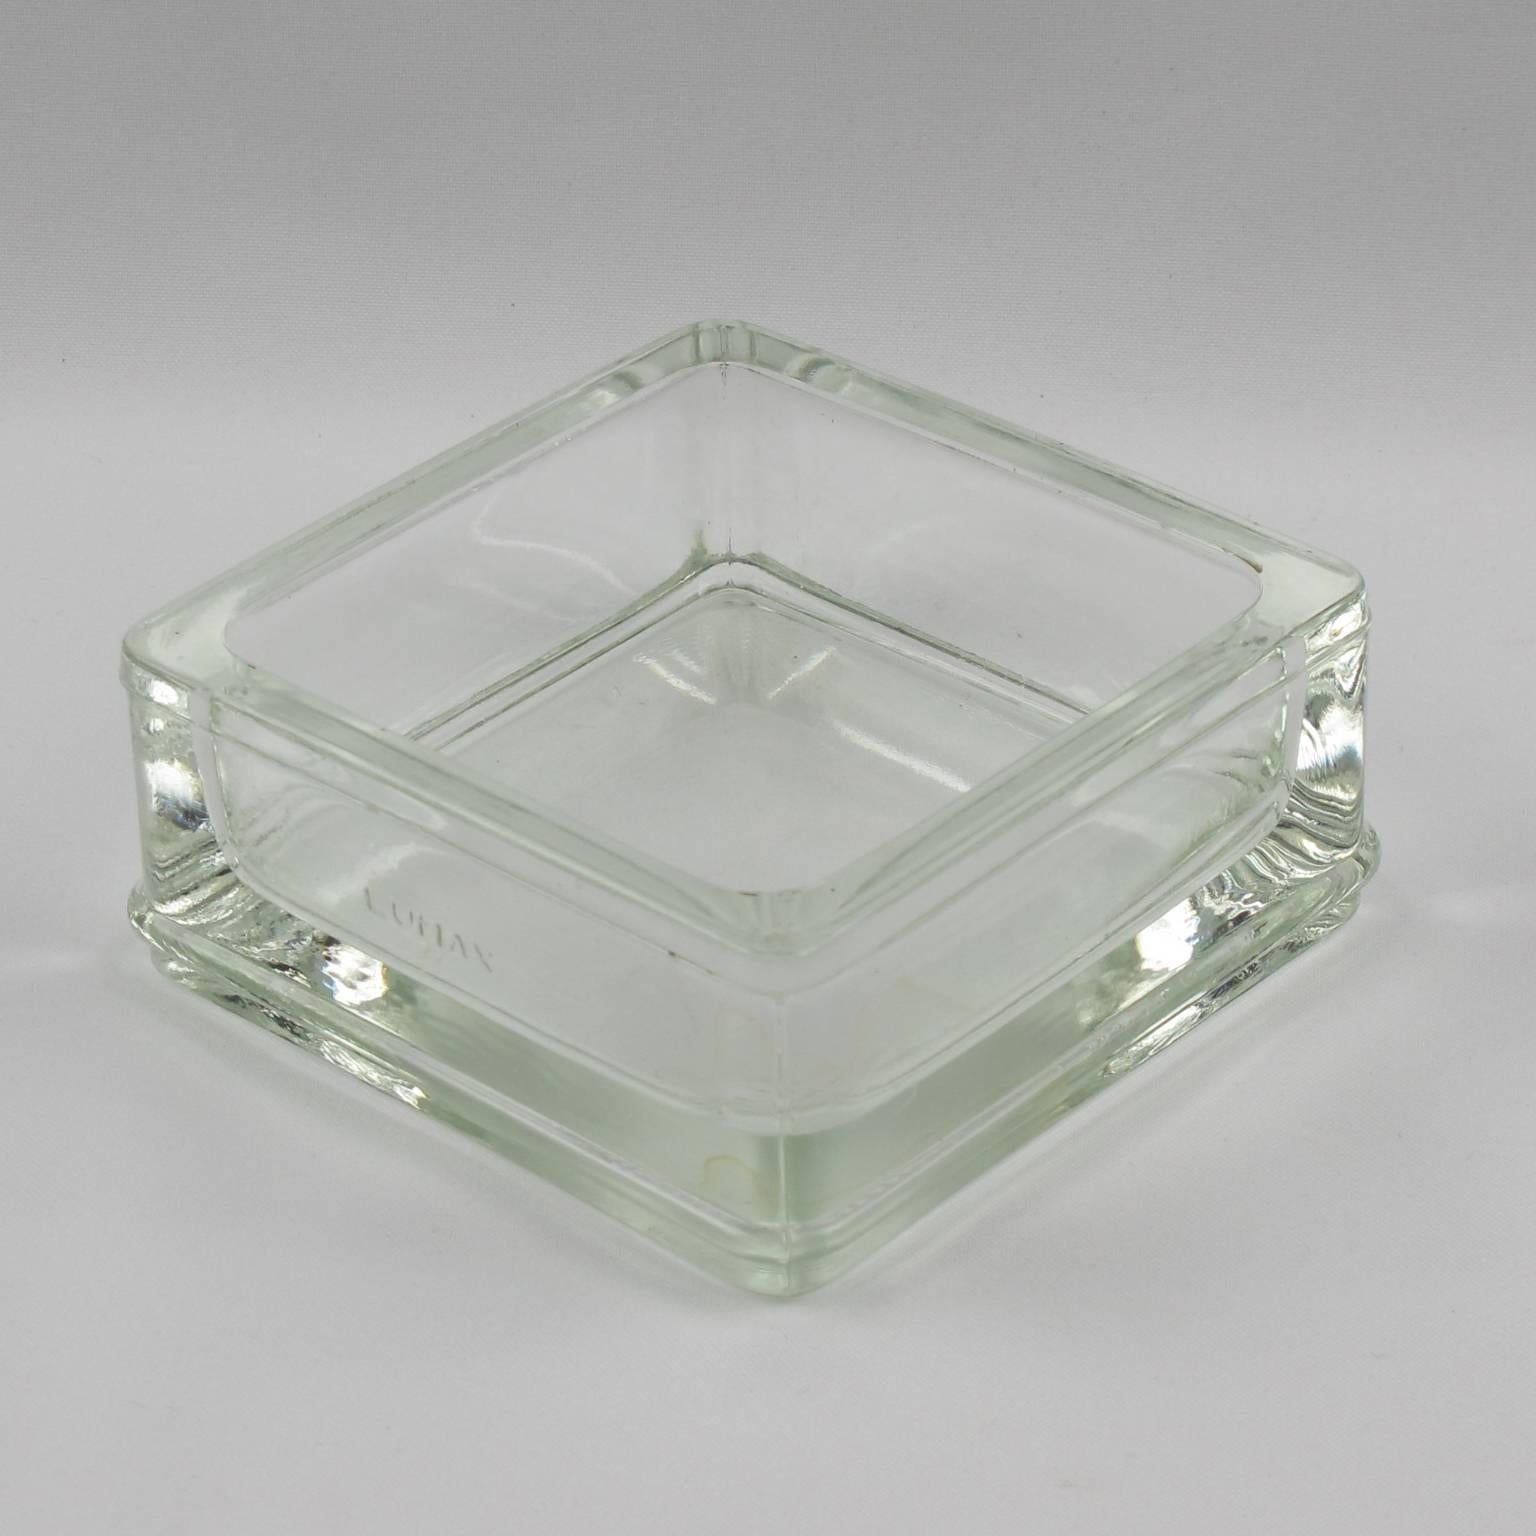 Industrial thick molded glass desktop accessory (desk tidy, ashtray or catchall) manufactured by Lumax, France. Original design by Le Corbusier. Engraved company logo on side. 
Measurements: 4.50 in. wide (11.5 cm) x 4.50 in. deep (11.5 cm) x 2.19